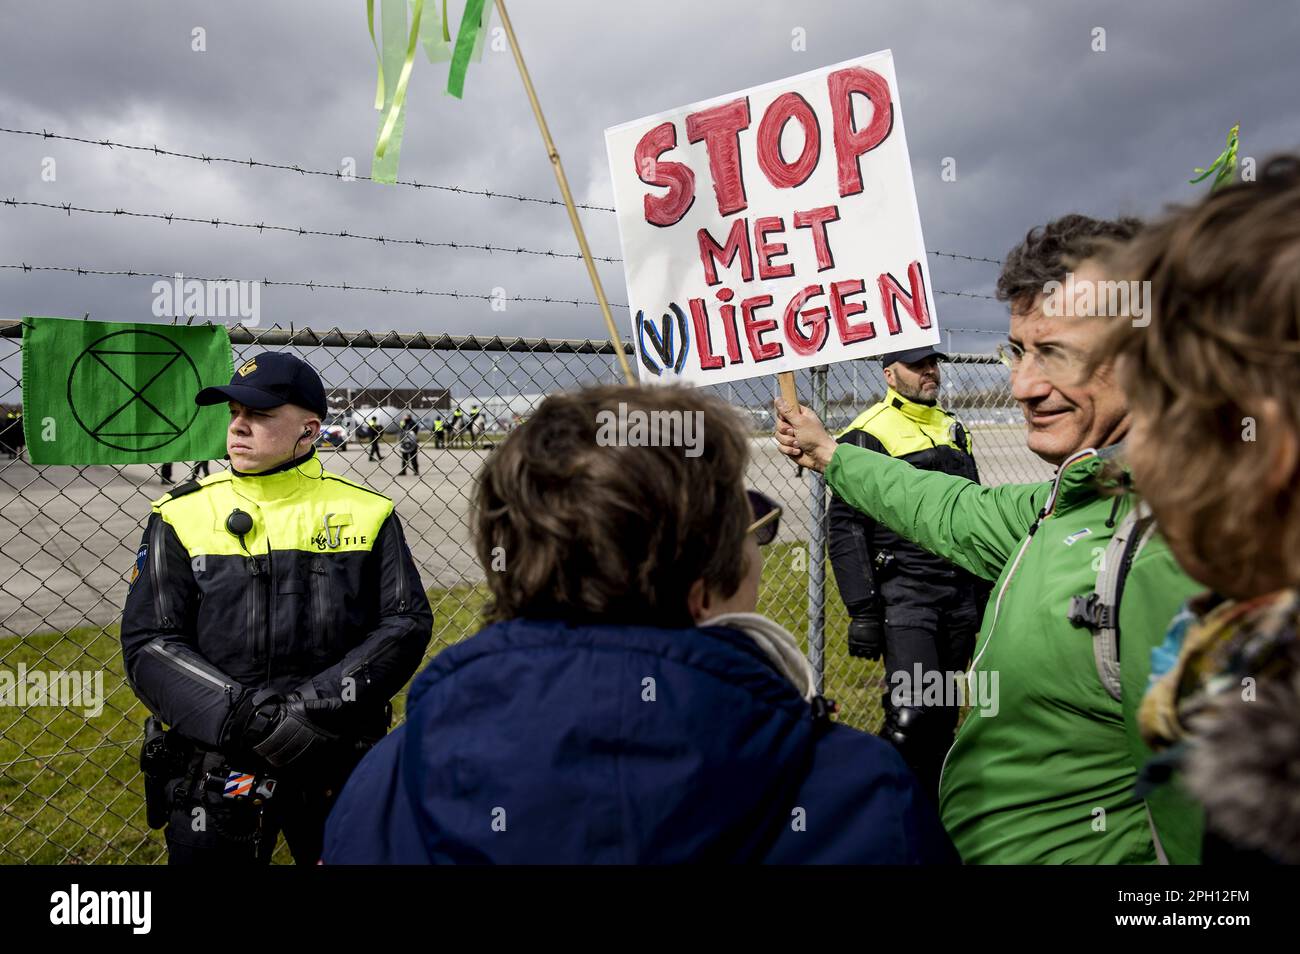 EINDHOVEN - Extinction Rebellion climate activists are taking action at Eindhoven Airport. The activists are very concerned about the damage that air traffic causes to the climate. ANP SEM VAN DER WAL netherlands out - belgium out Stock Photo